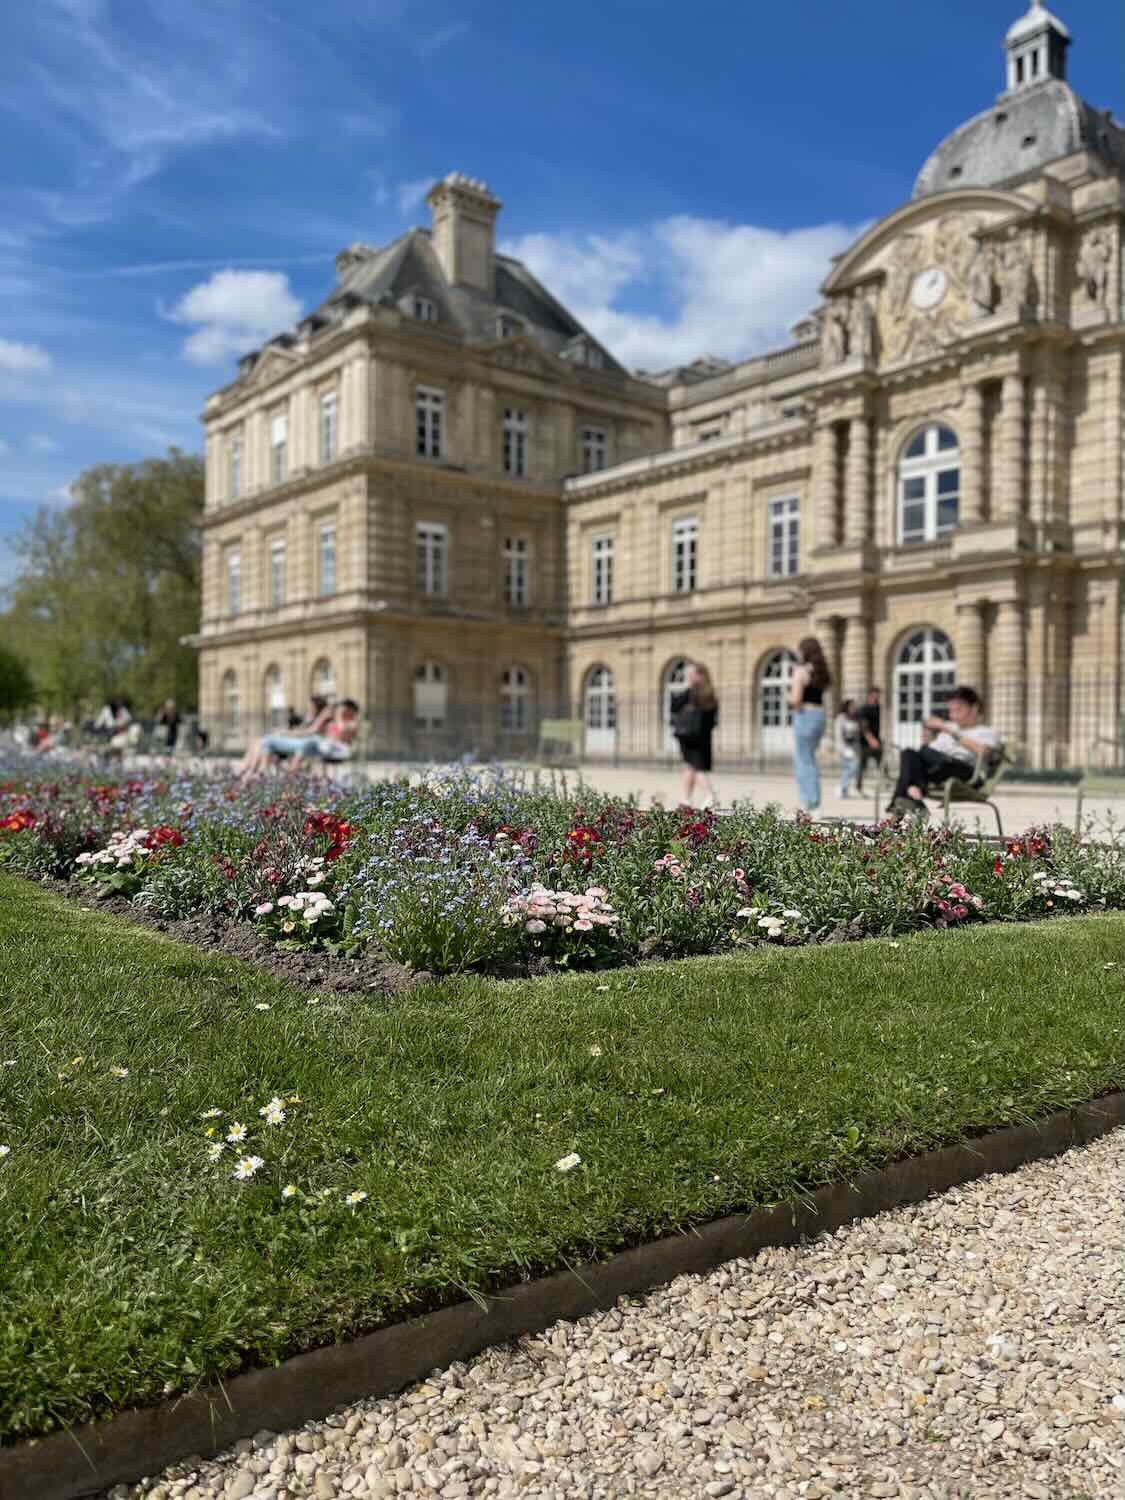 historical building within the Luxembourg Gardens, viewed across neatly trimmed lawns and colorful flowerbeds, under a clear blue sky.